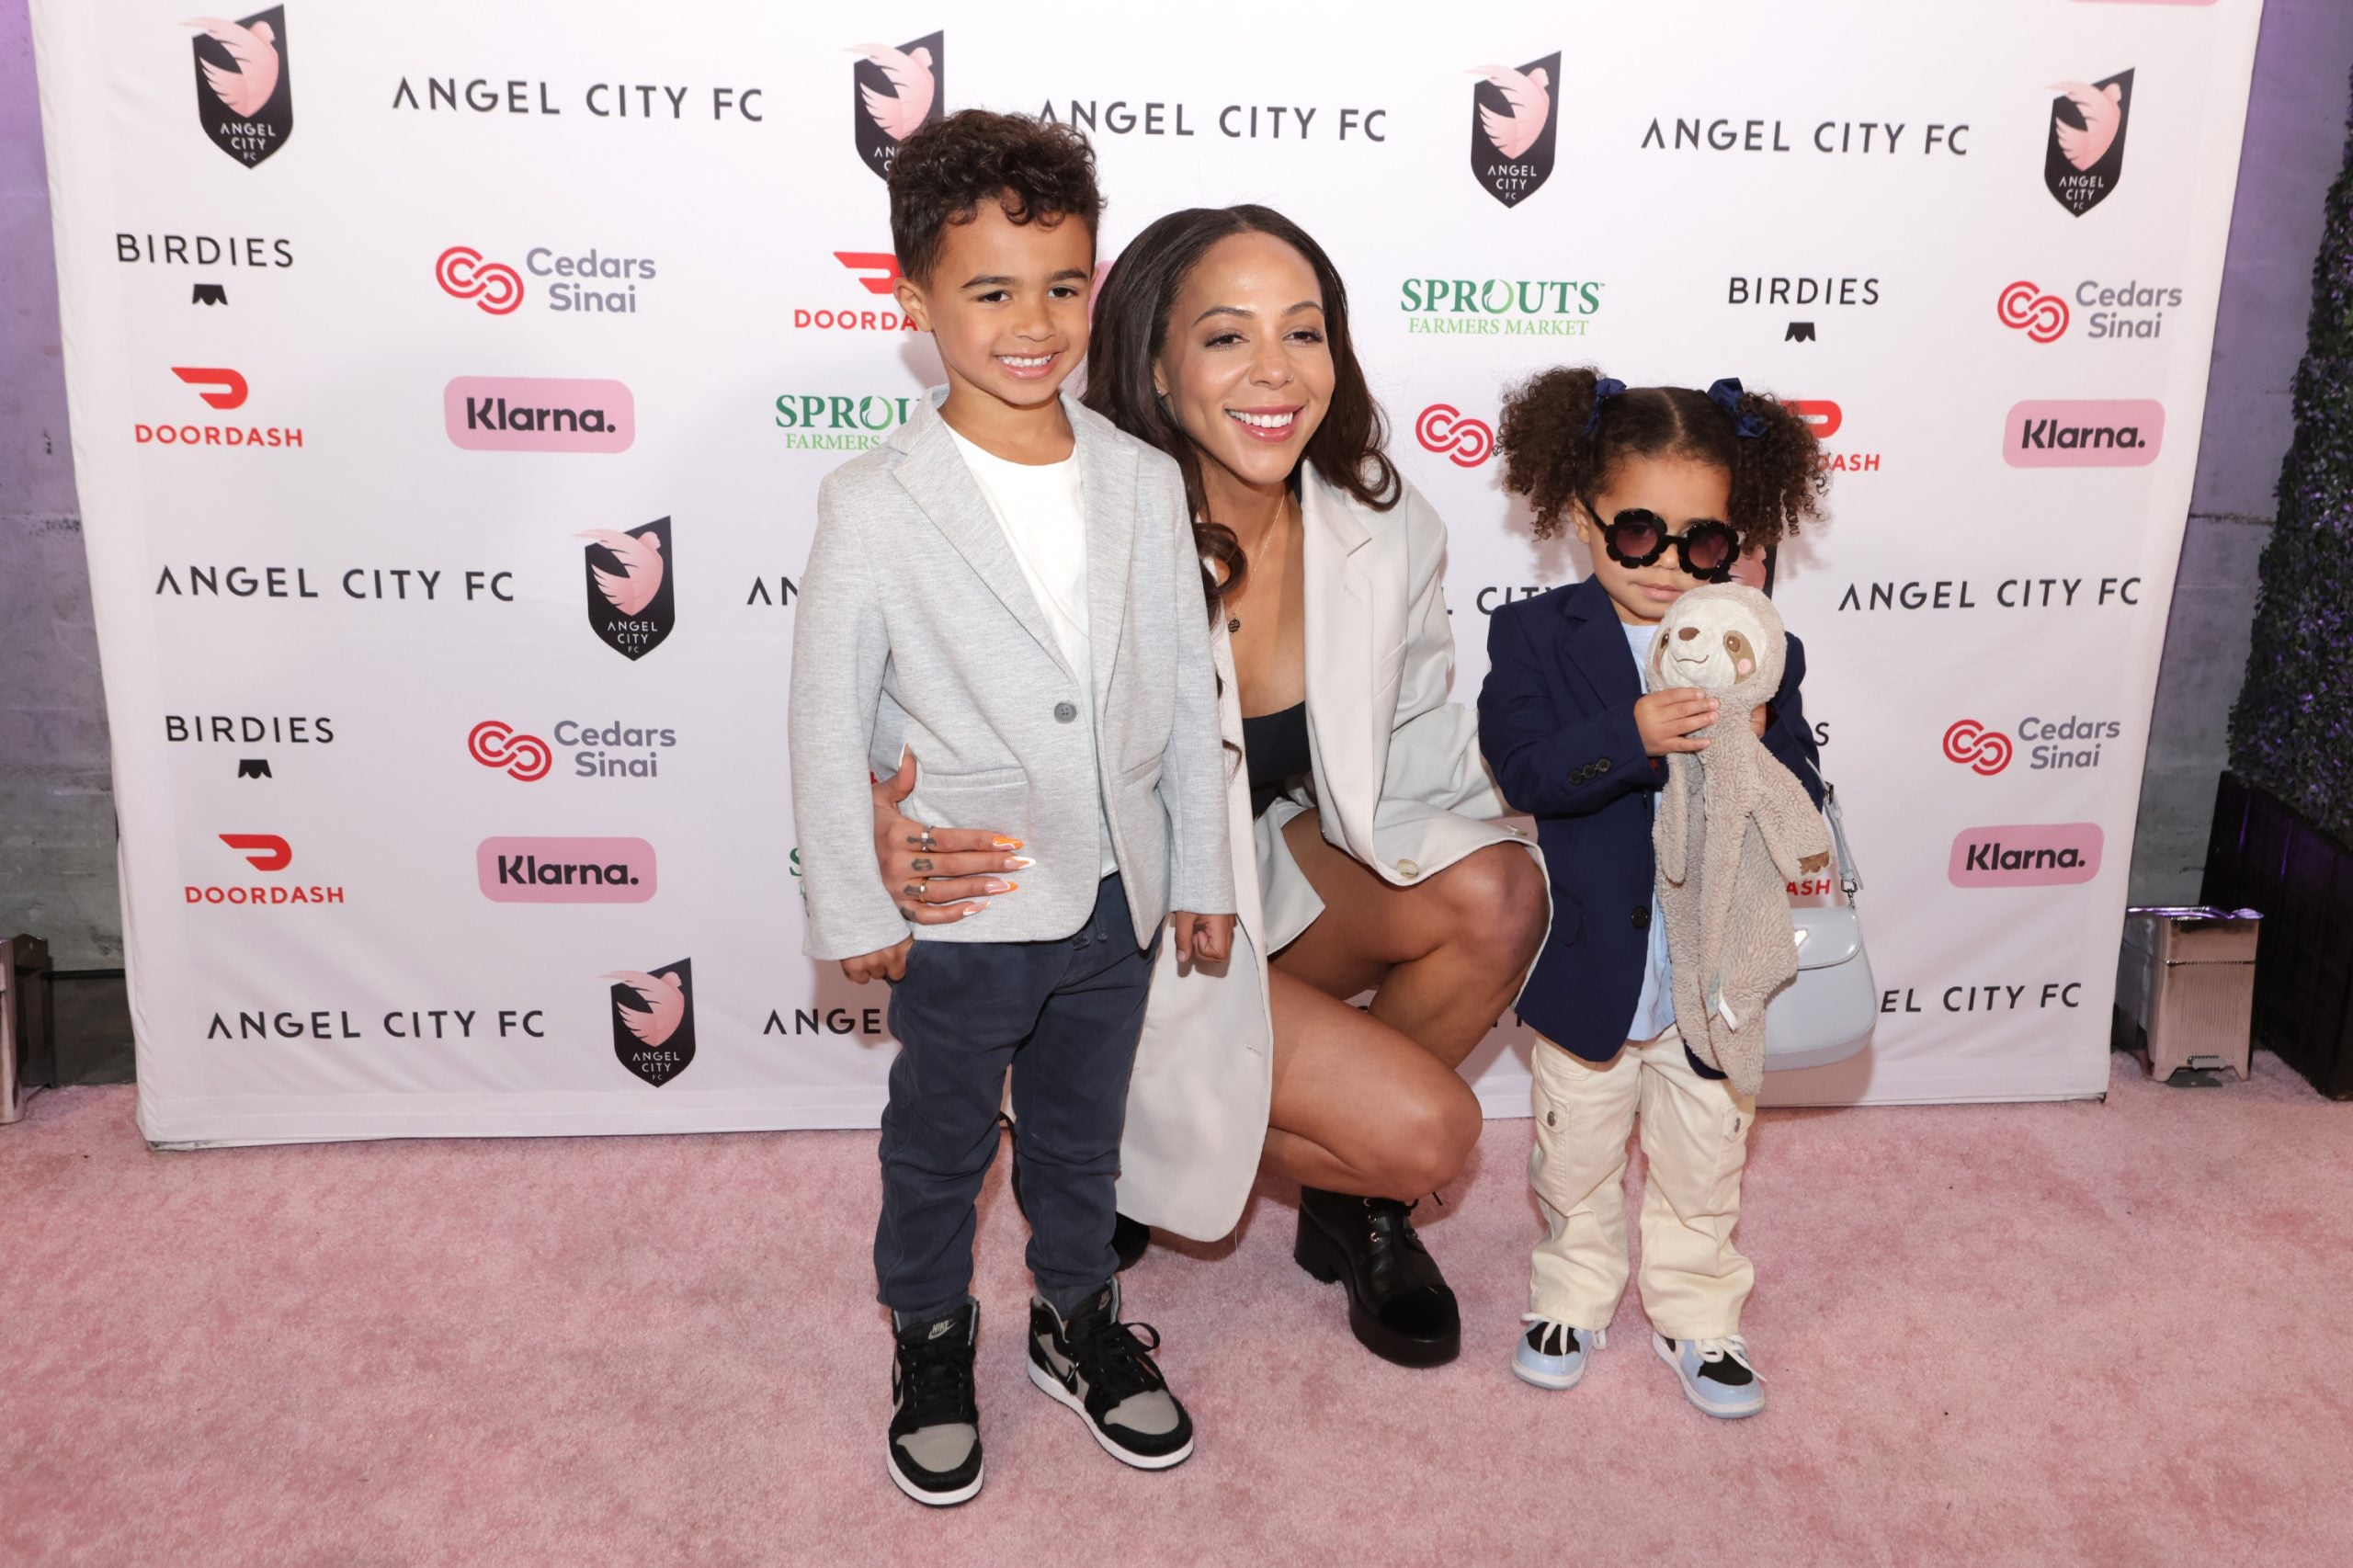 Mamas At Work: Soccer Star Sydney Leroux Travels With Her Kids During The Season And It Keeps Her Motivated